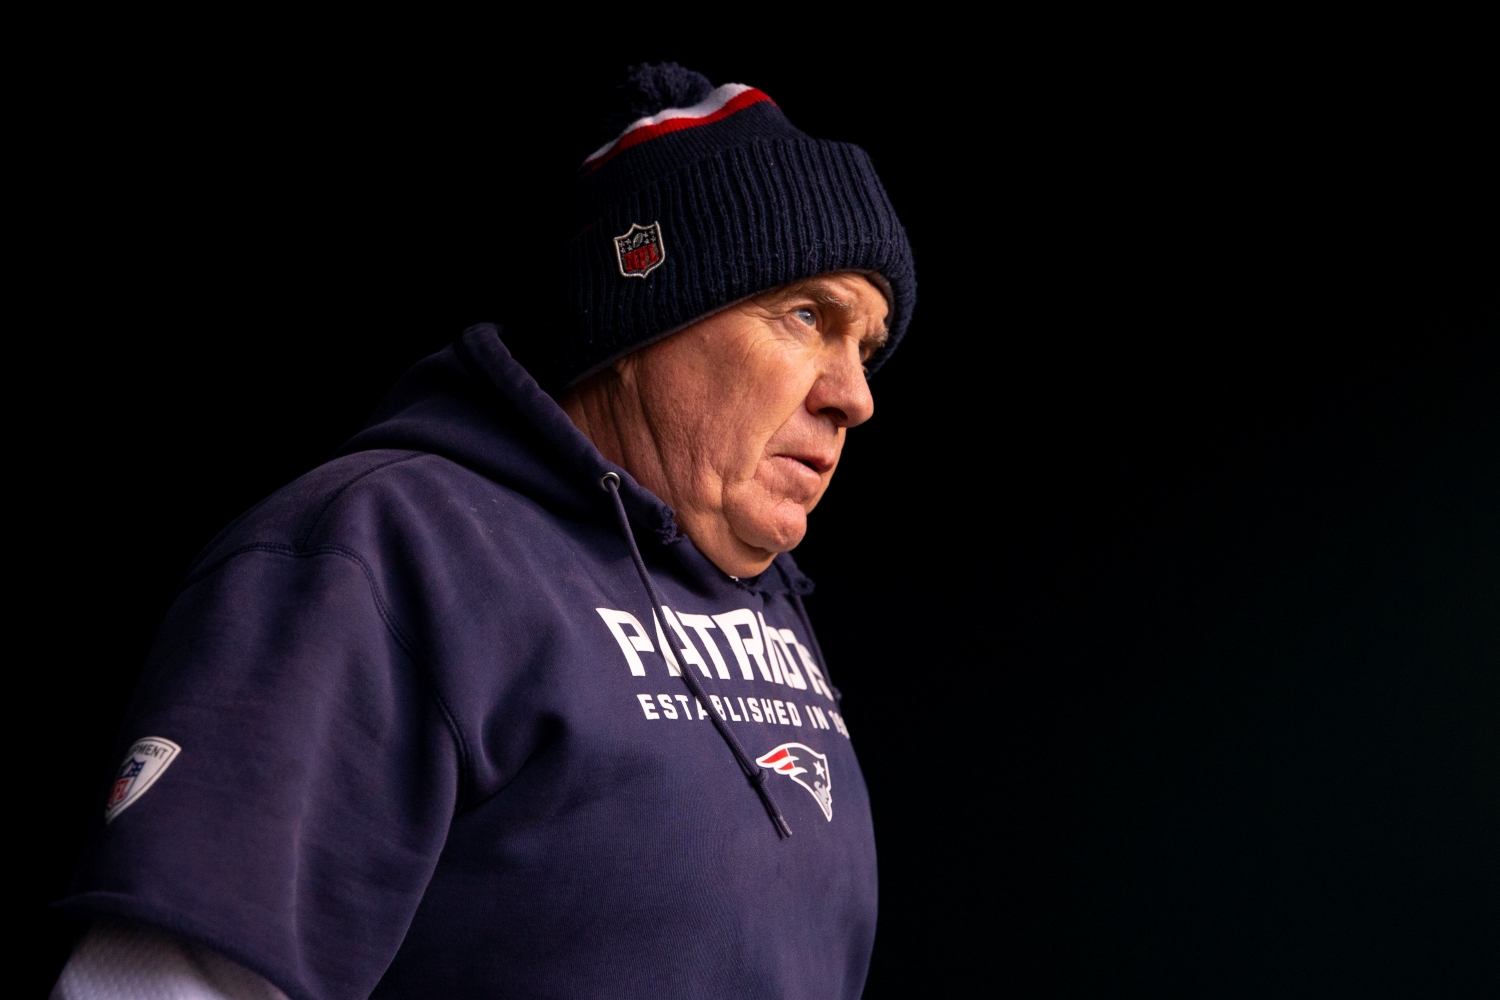 Head coach Bill Belichick of the New England Patriots walks onto the field prior to the game against the Philadelphia Eagles on Nov. 17, 2019.